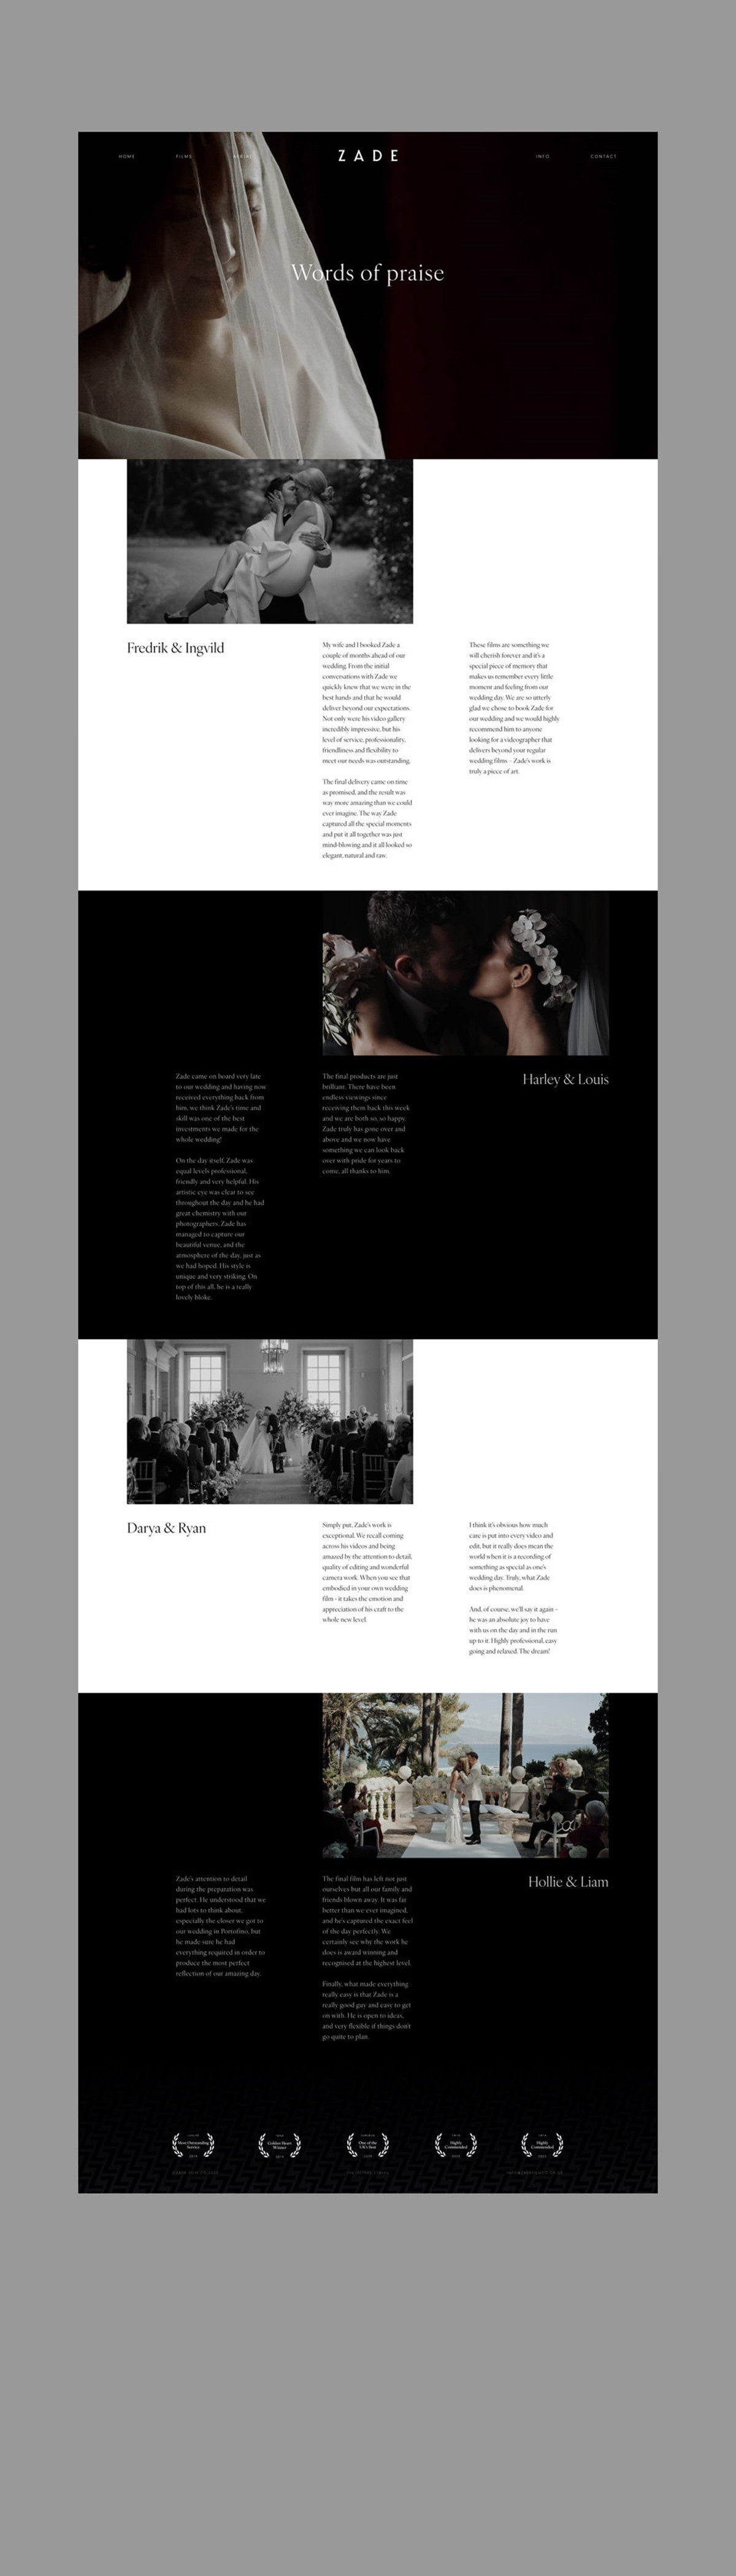 Zade Film Co. Testimonials page. Web design + strategy by Superfried design studio, Manchester.